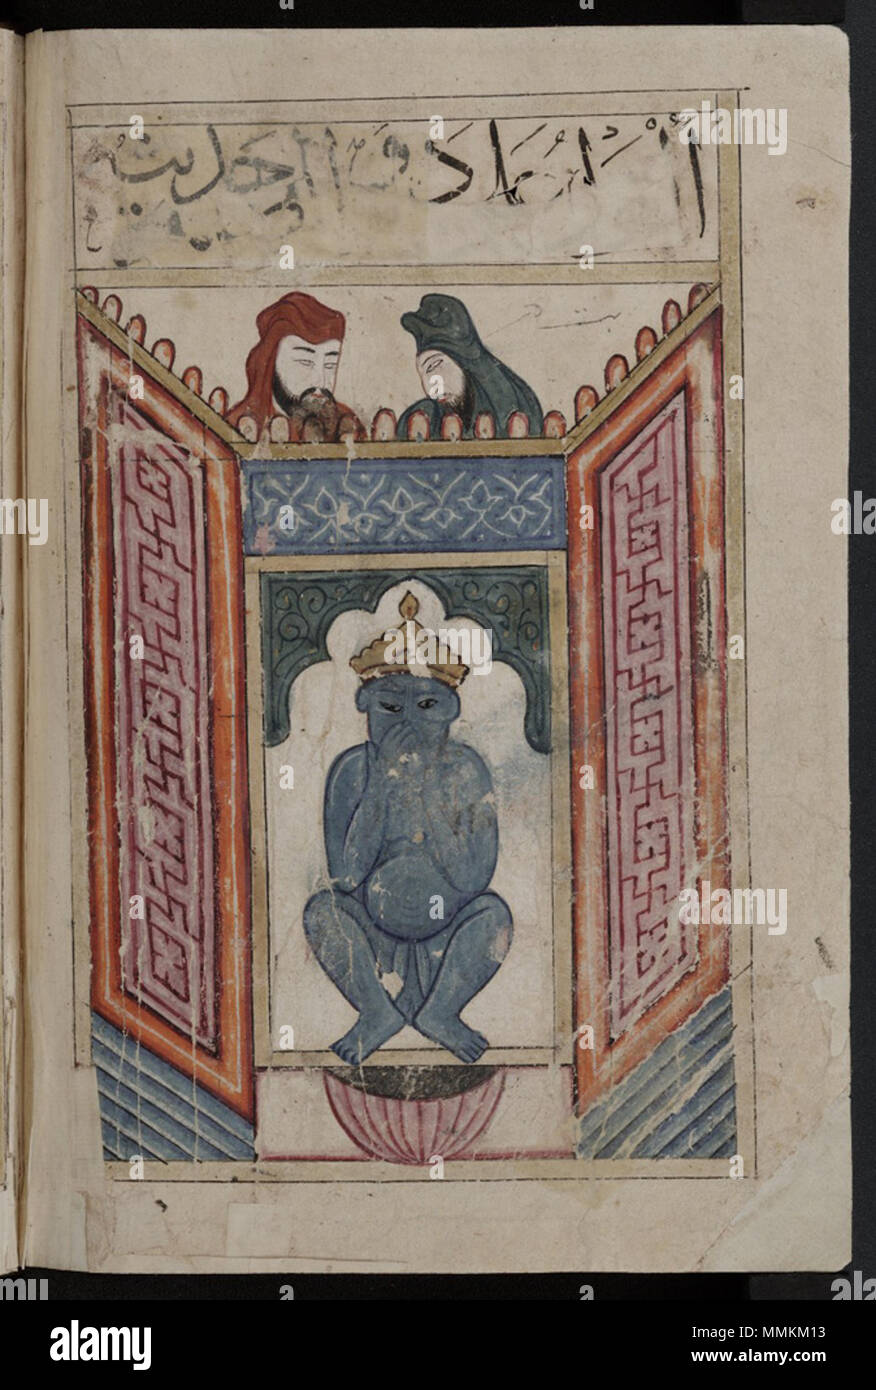 . English: The temple of the idol. Illustration of a tale. Page from a manuscript known as Kitab al-bulhan or 'Book of Wonders' held at the Bodelian Library. Shelfmark: MS. Bodl. Or. 133  . between 1390 and 1450. From a 15th-century Arabic collectaneous manuscript known as Kitab al-bulhan. Book of Wonders folio 37b Stock Photo